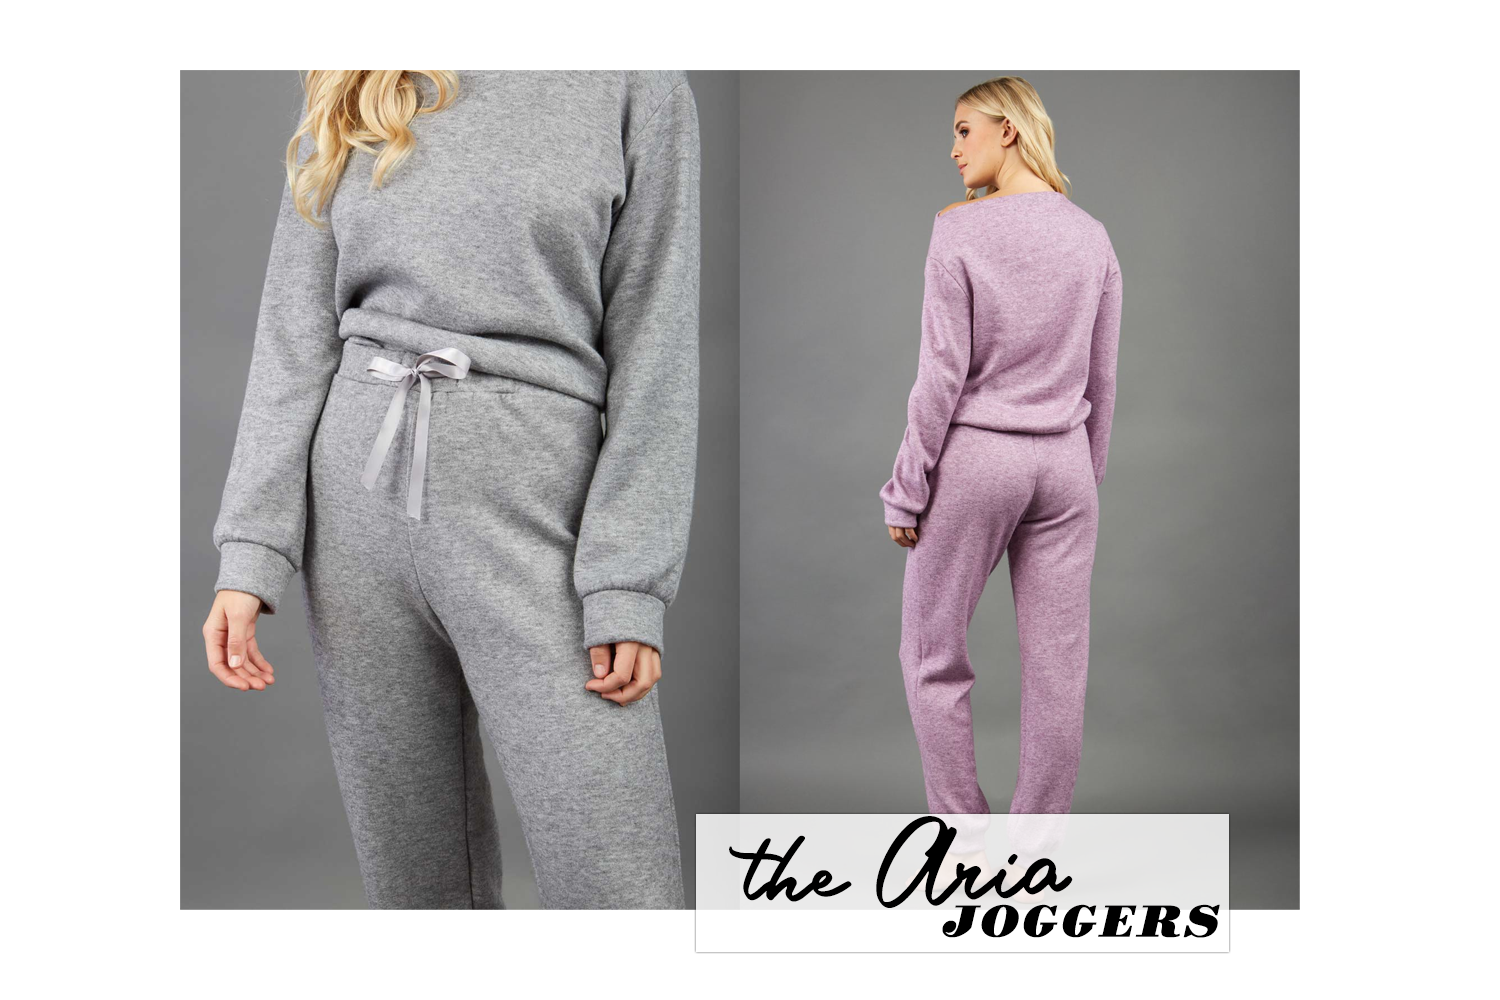 two images combined into one edit, of a model wearing the aria joggers in grey and lavender.